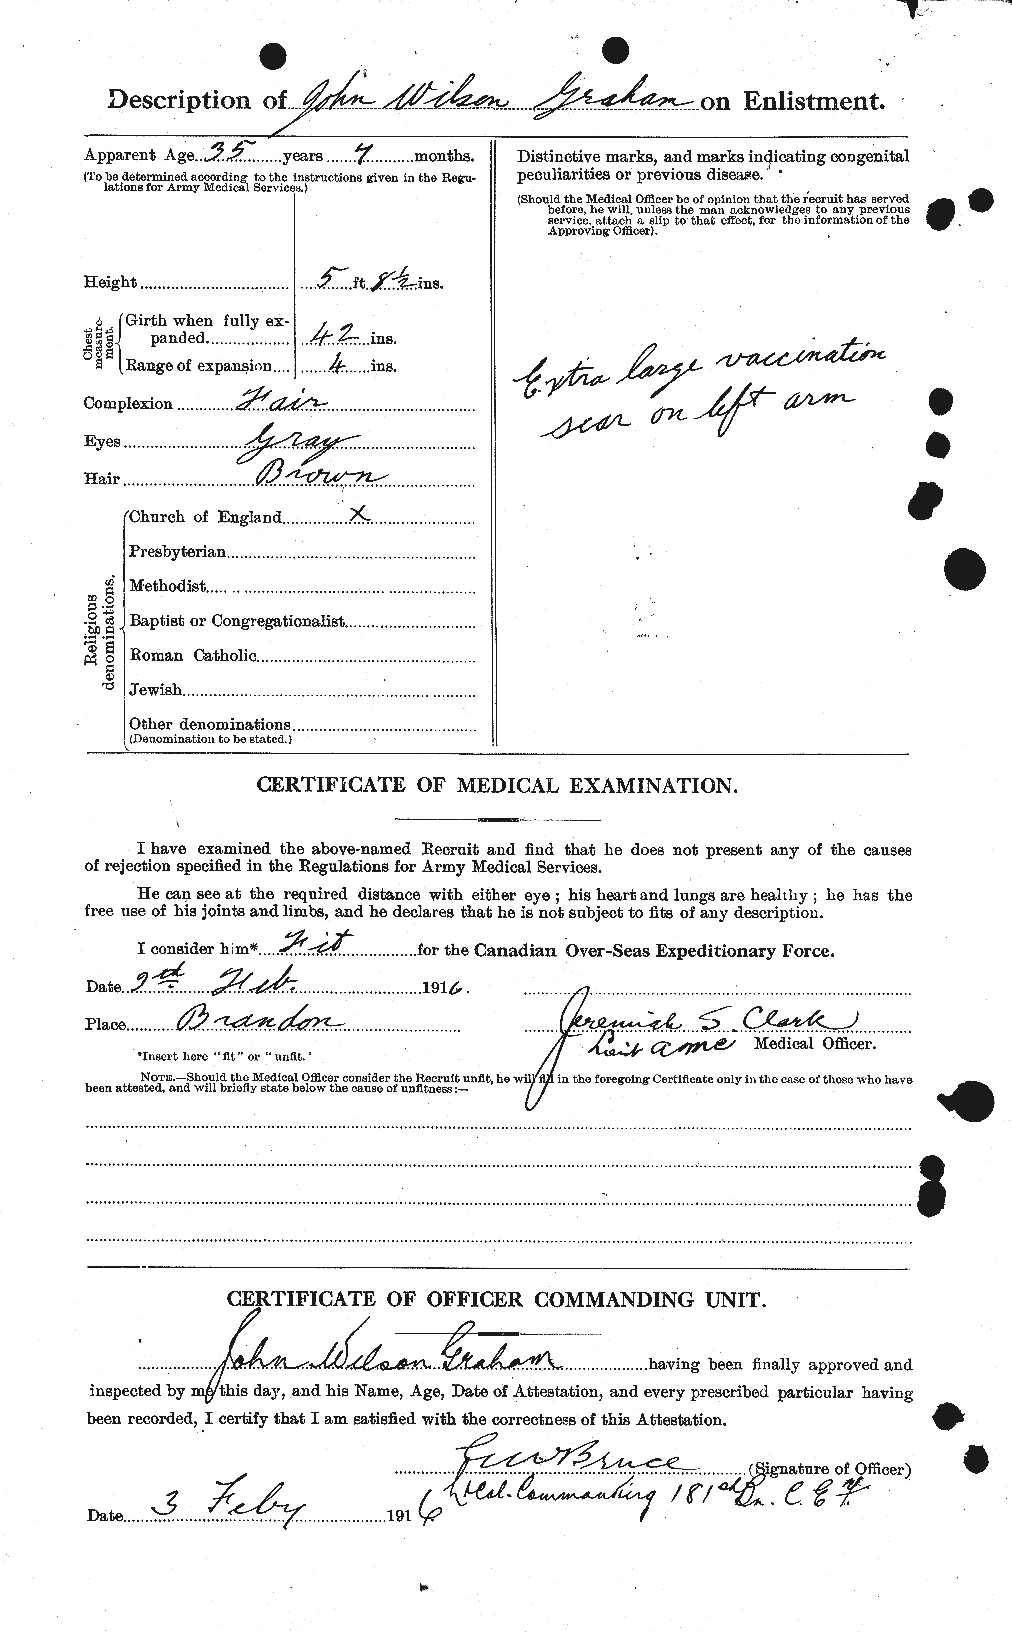 Personnel Records of the First World War - CEF 359222b